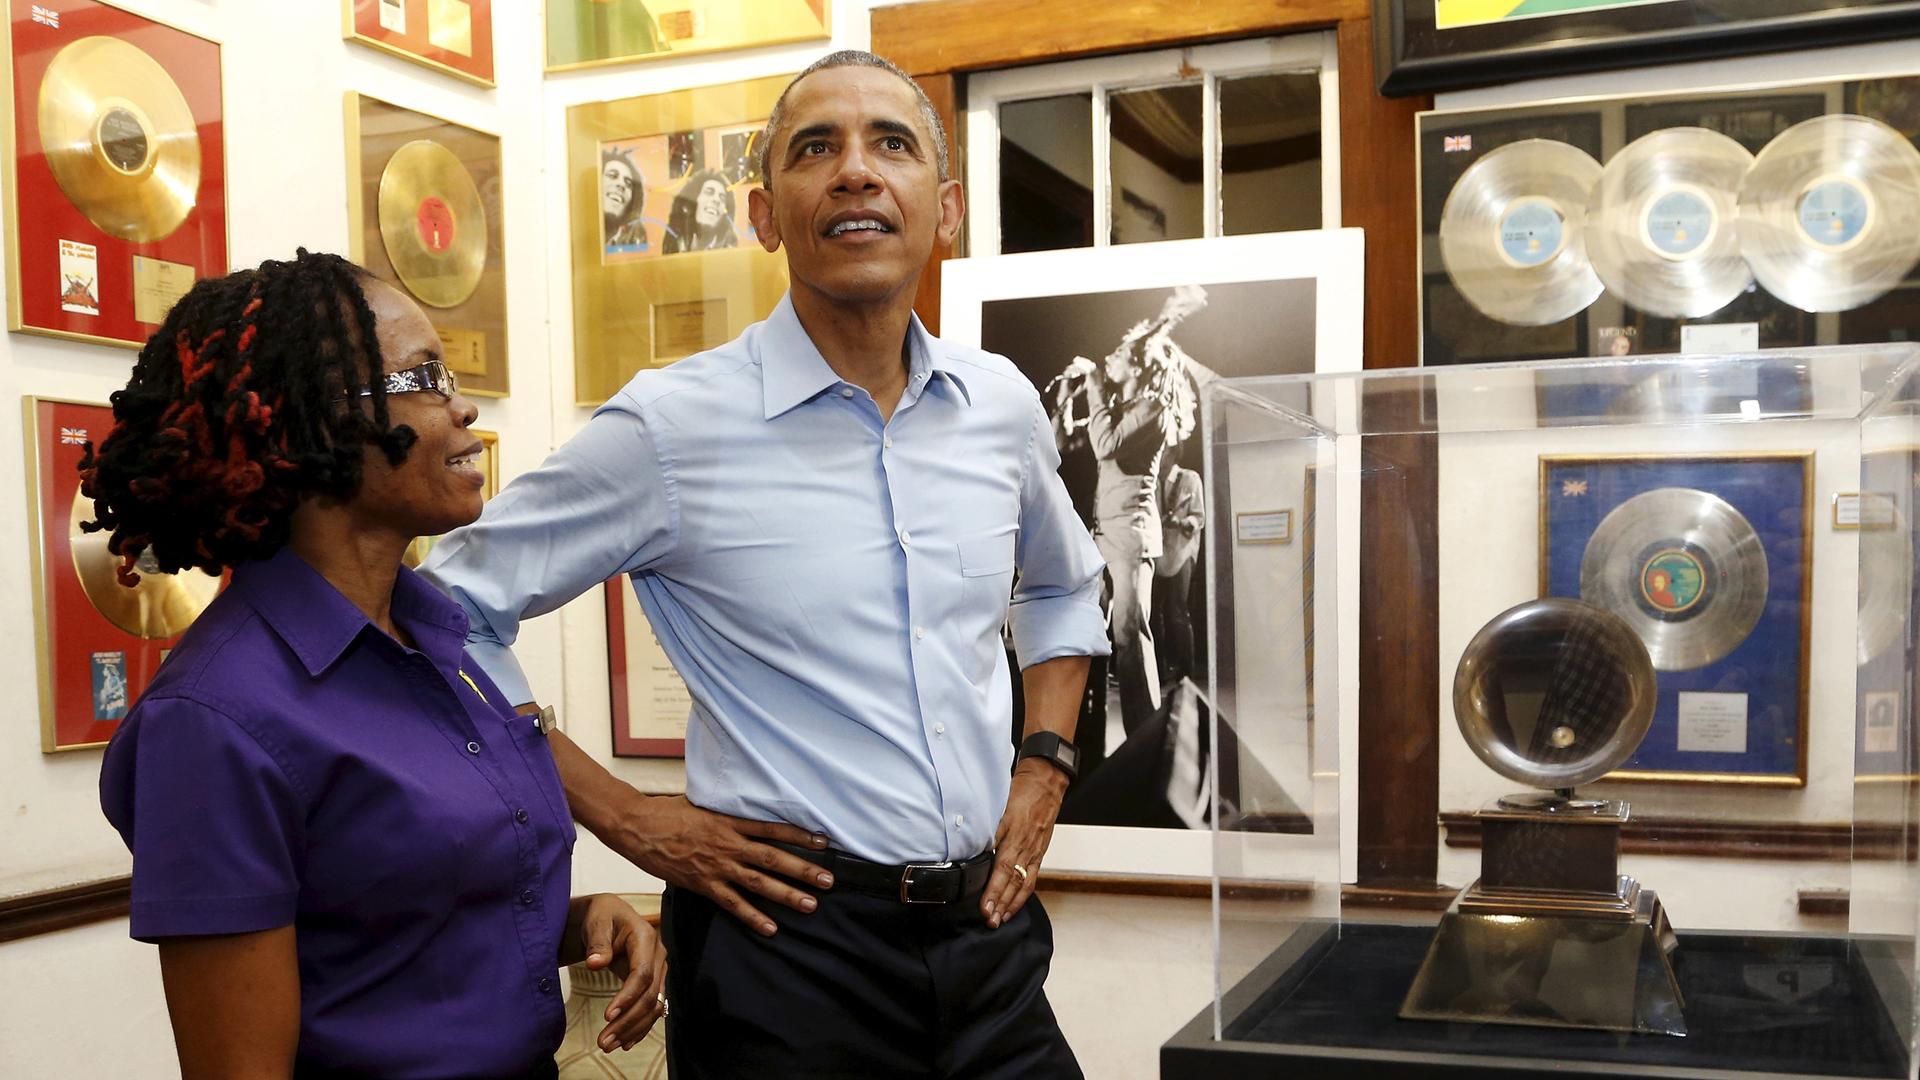 US President Barack Obama gets a tour of the Bob Marley Museum in Kingston, Jamaica.